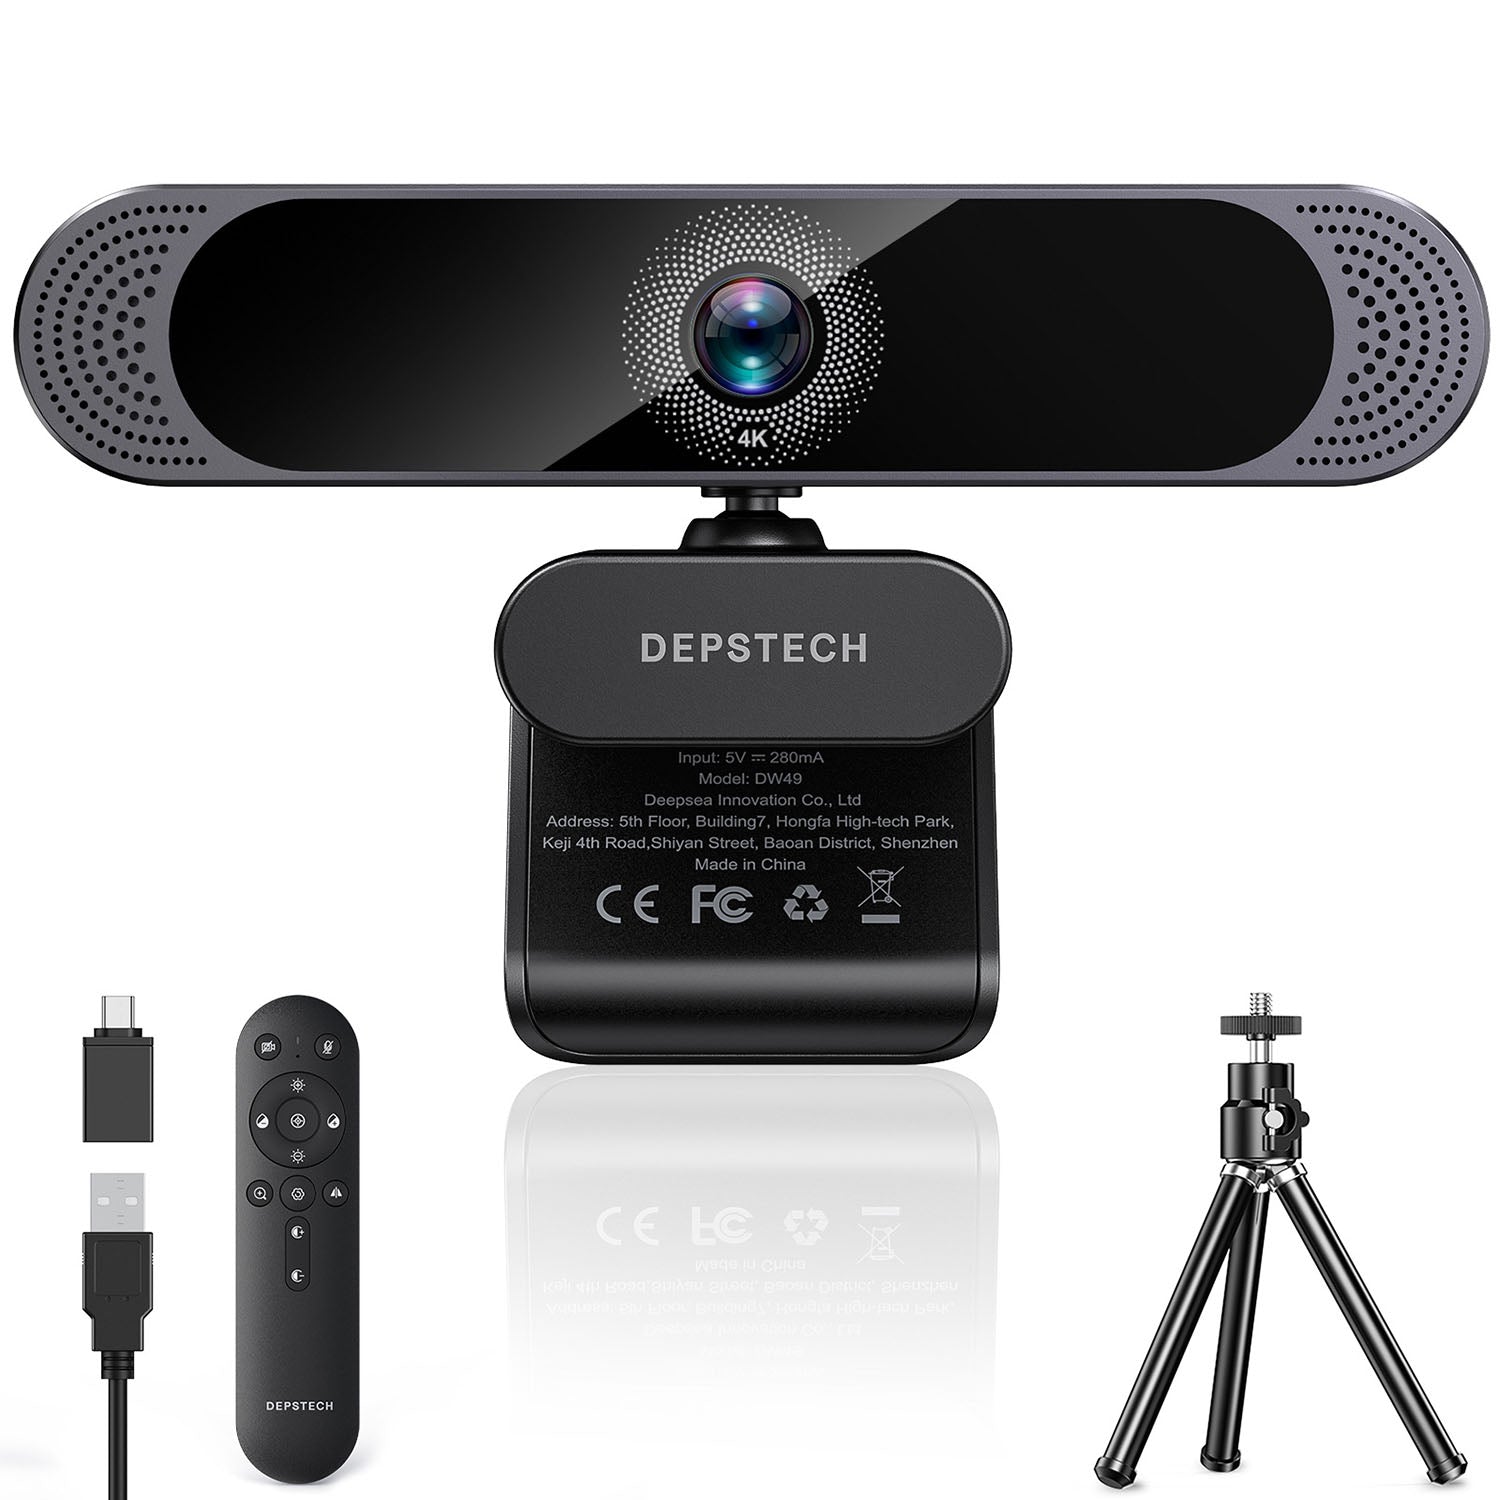 3X Zoomable 4K Webcam with Dual Noise-Canceling Mics and Remote Control